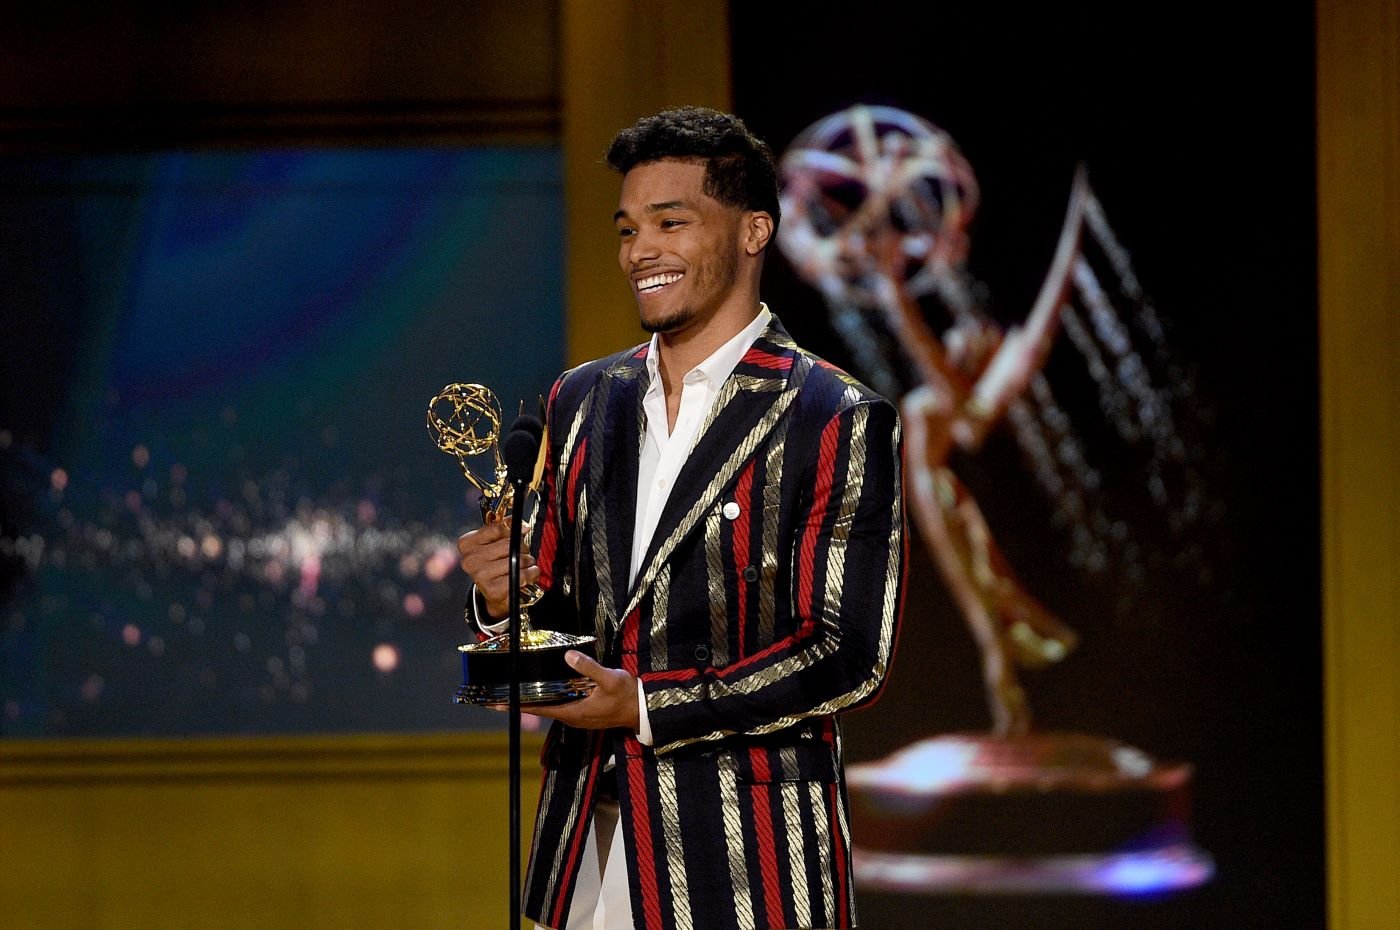 Robin Flynn from 'The Bold and the Beautiful' that played Zende accepting an award in a black, gold, and red striped suit jacket and white button-up shirt.